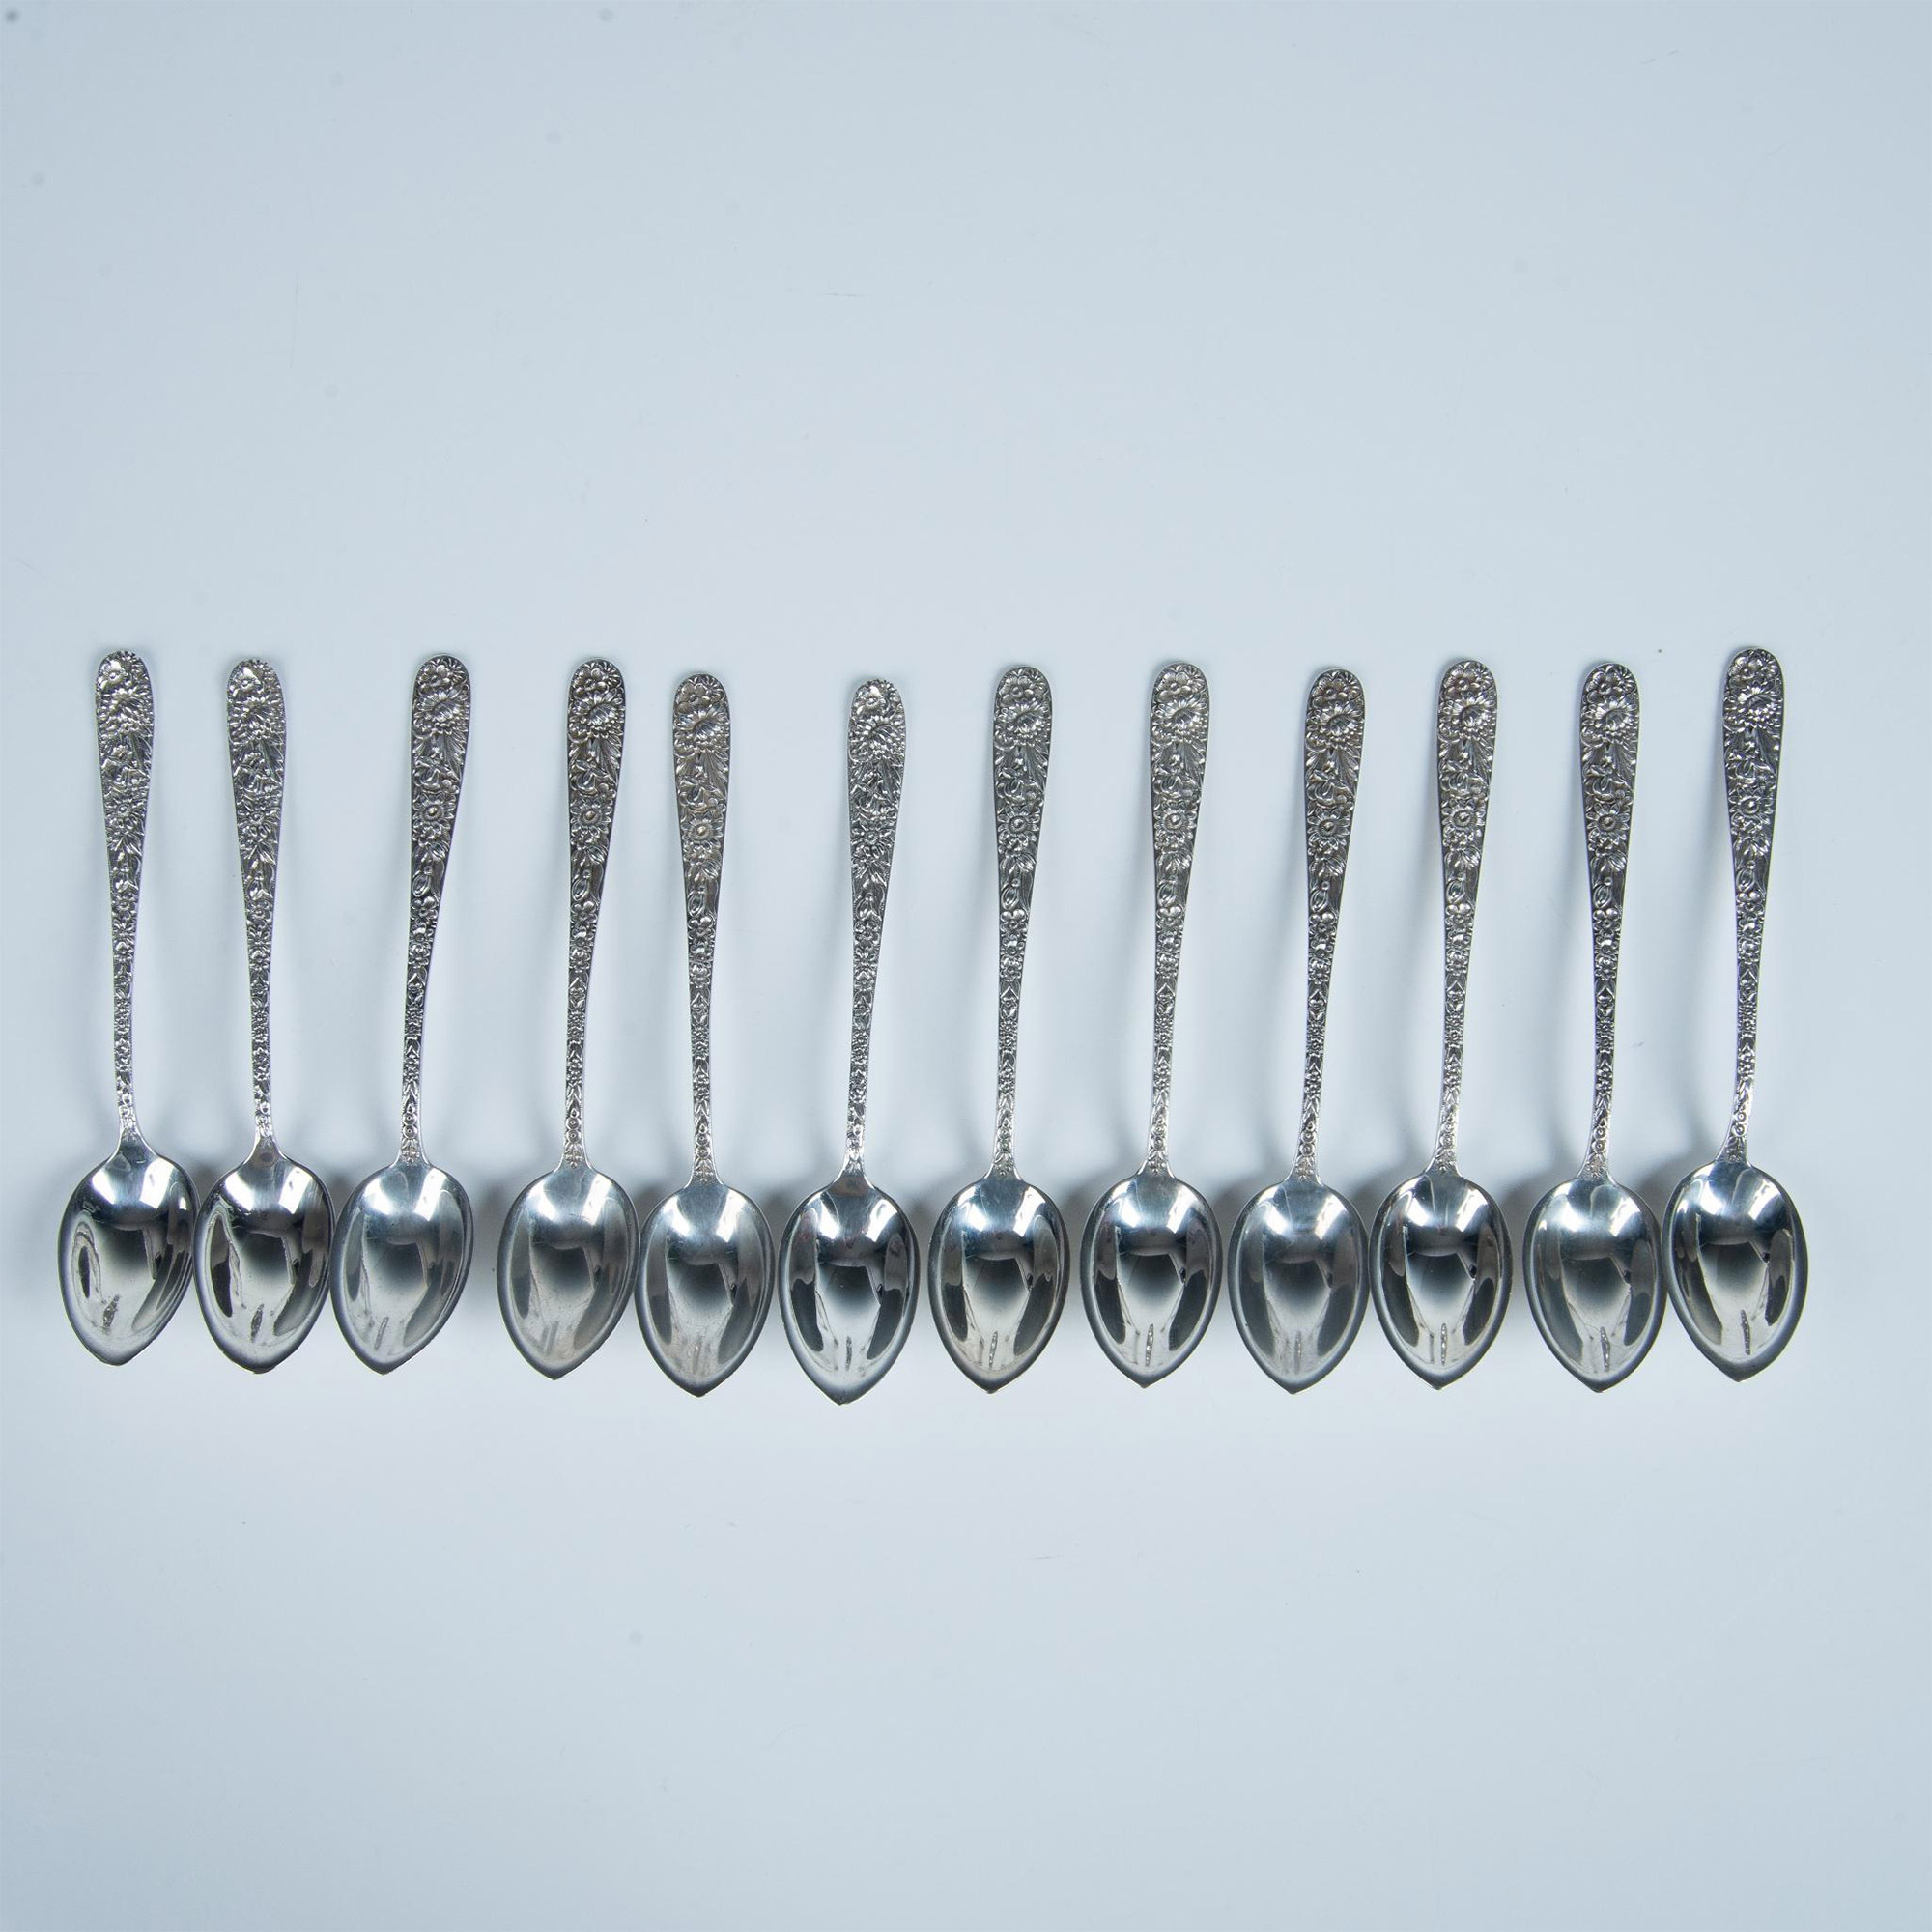 12pc S. Kirk & Son Sterling Silver Repousse Teaspoons - Image 2 of 12